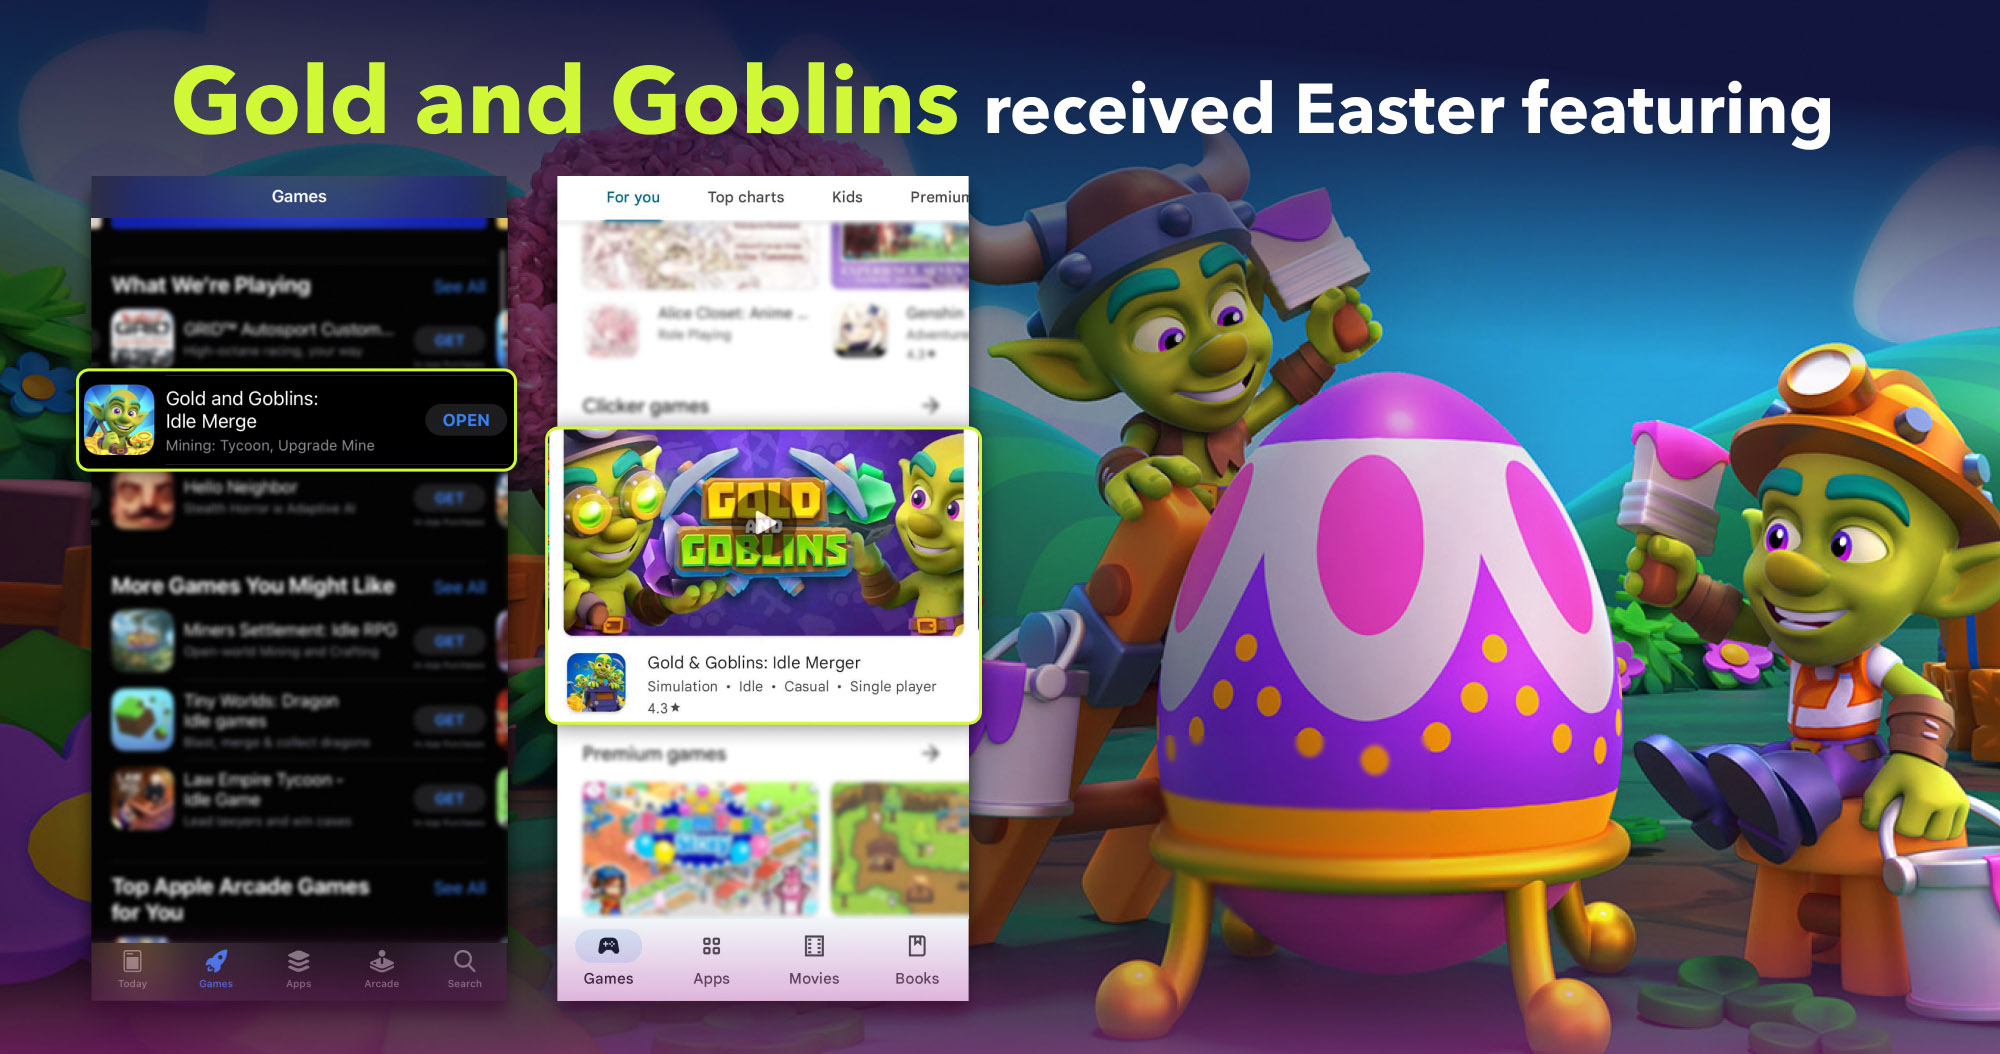 Gold & Goblins Received Easter Featuring